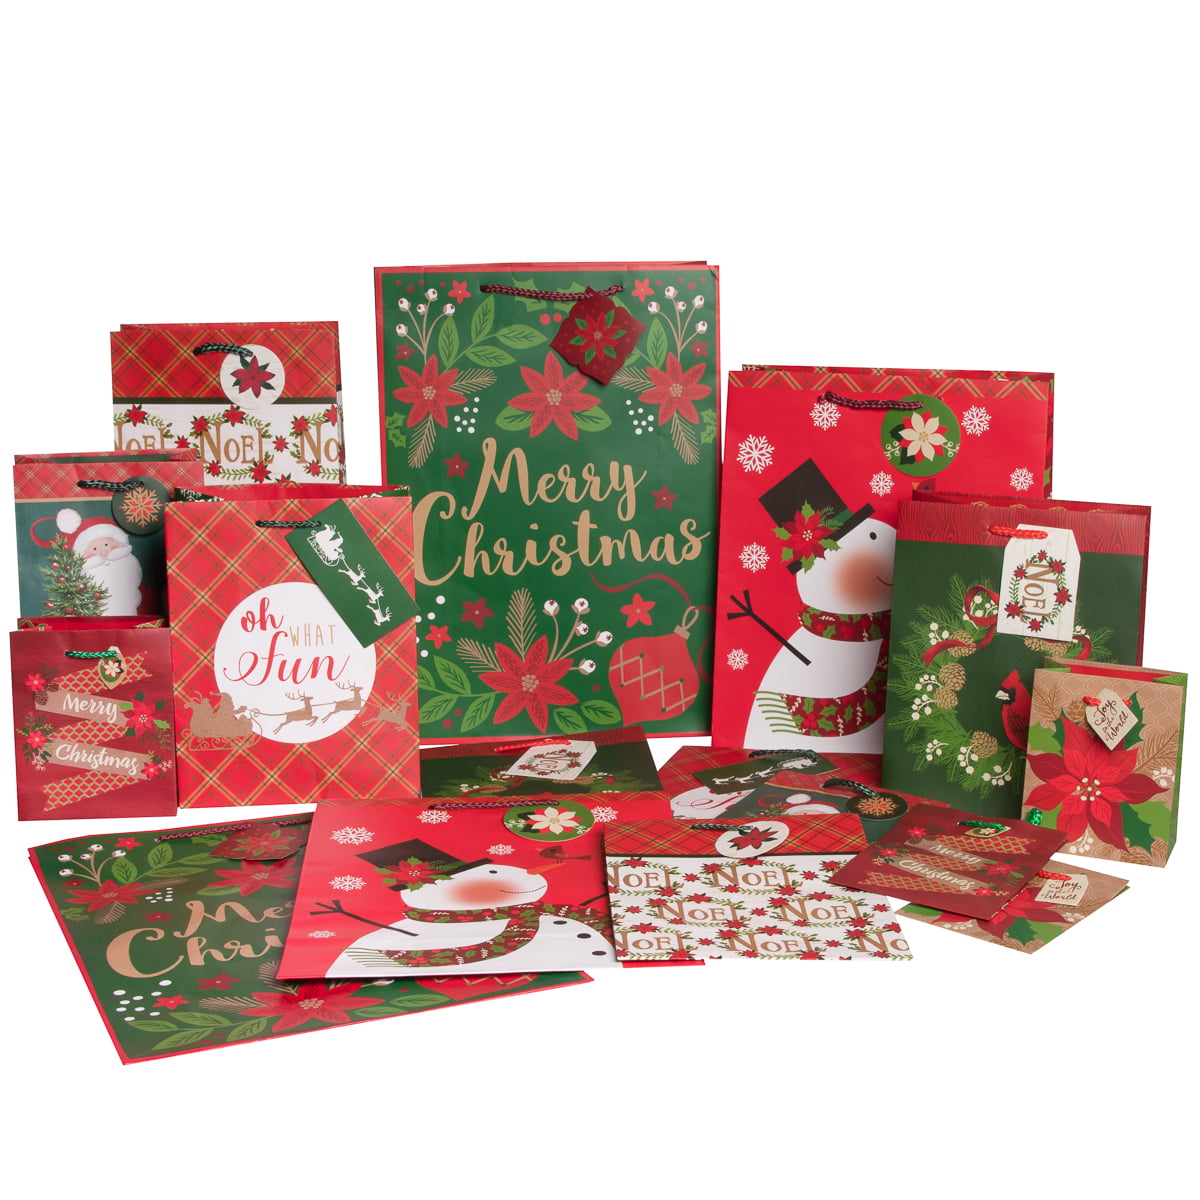 Paper Craft 16 Pack Christmas Gift Bags Large Bulk Assortment with Handles and Tags for Wrapping ...